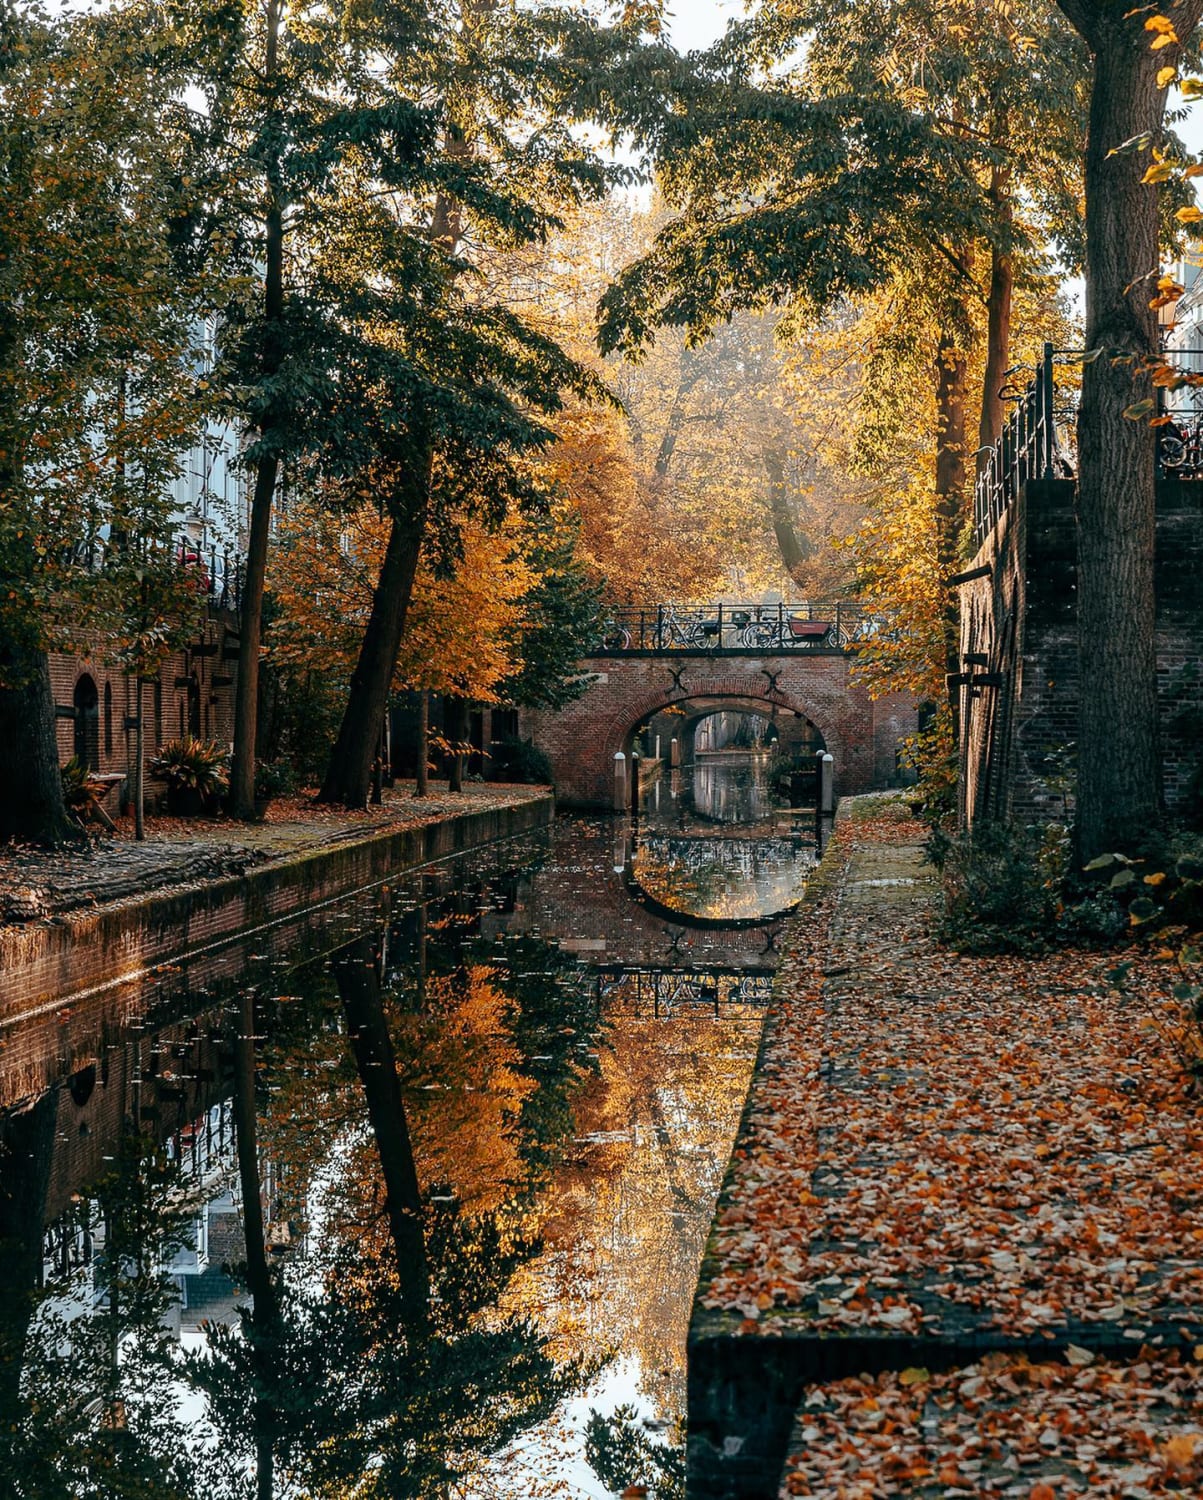 Canal in the morning, Utrecht, the Netherlands.